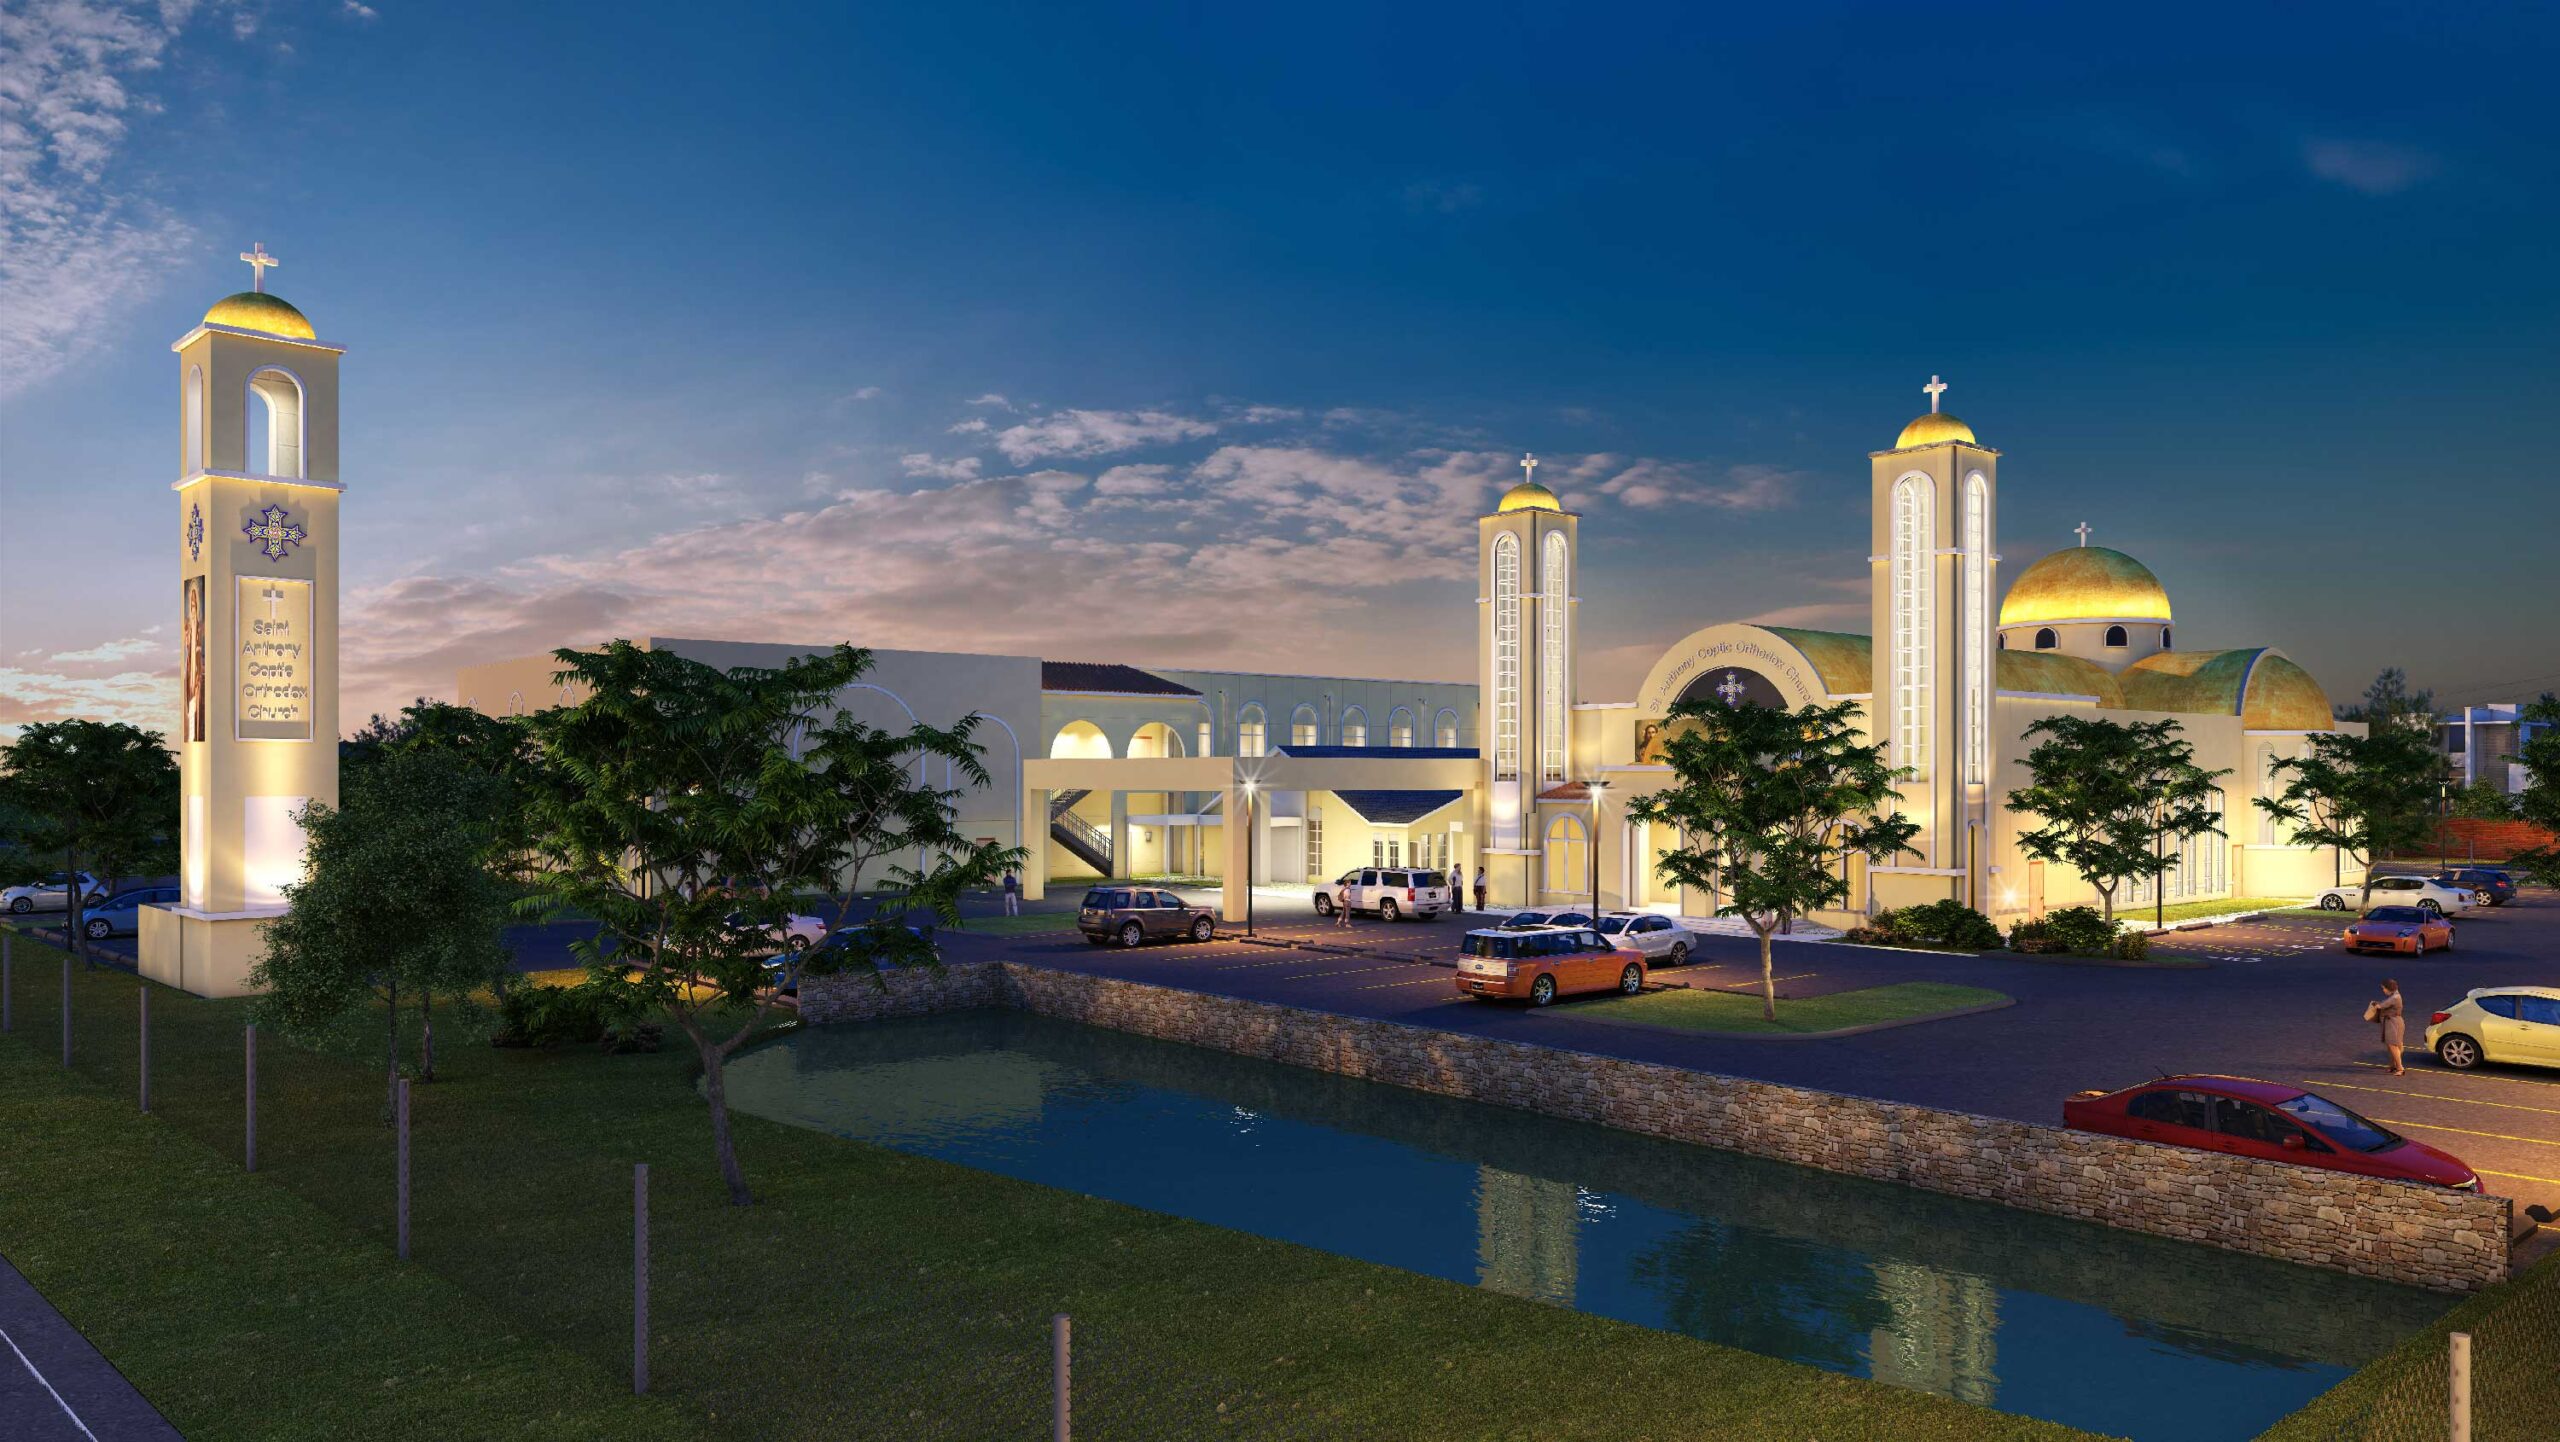 St. Anthony's Coptic Orthodox Church rendering of grounds, buildings and parking lot nighttime